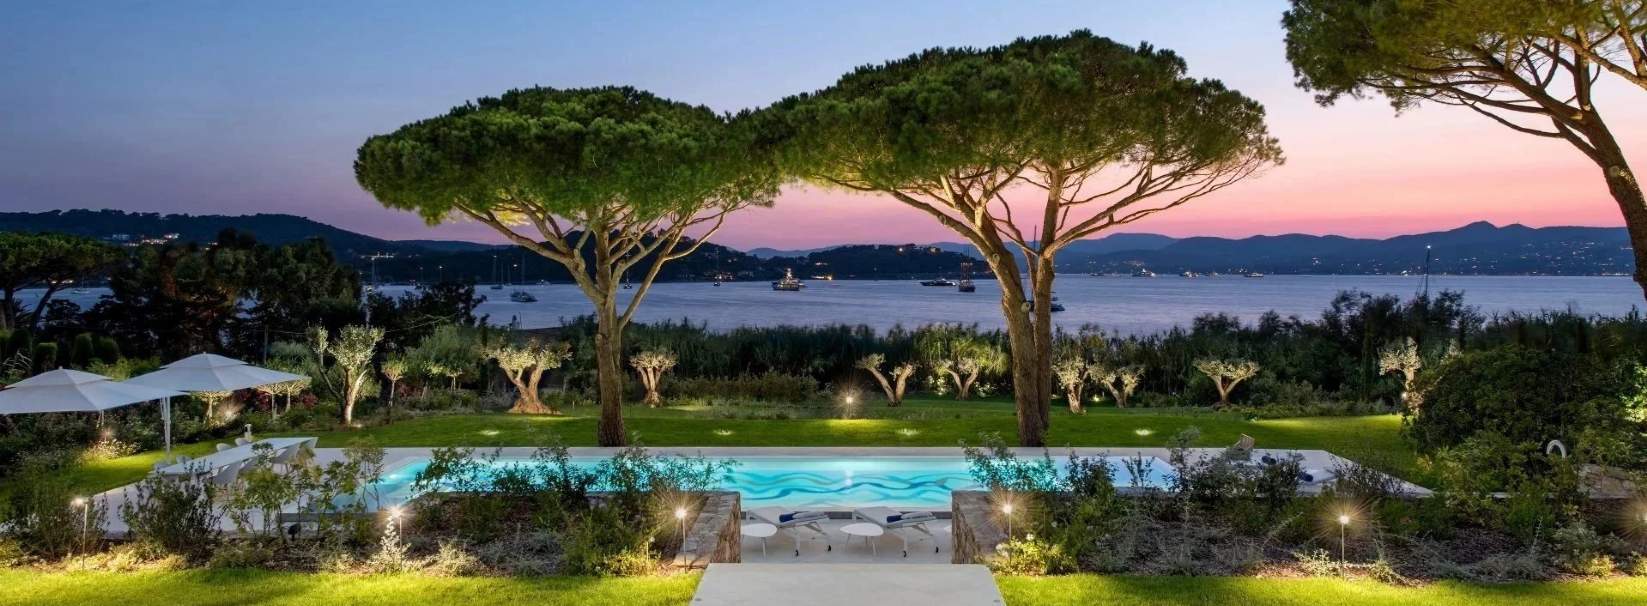 Riviera Dreaming - Top rental properties French Riviera